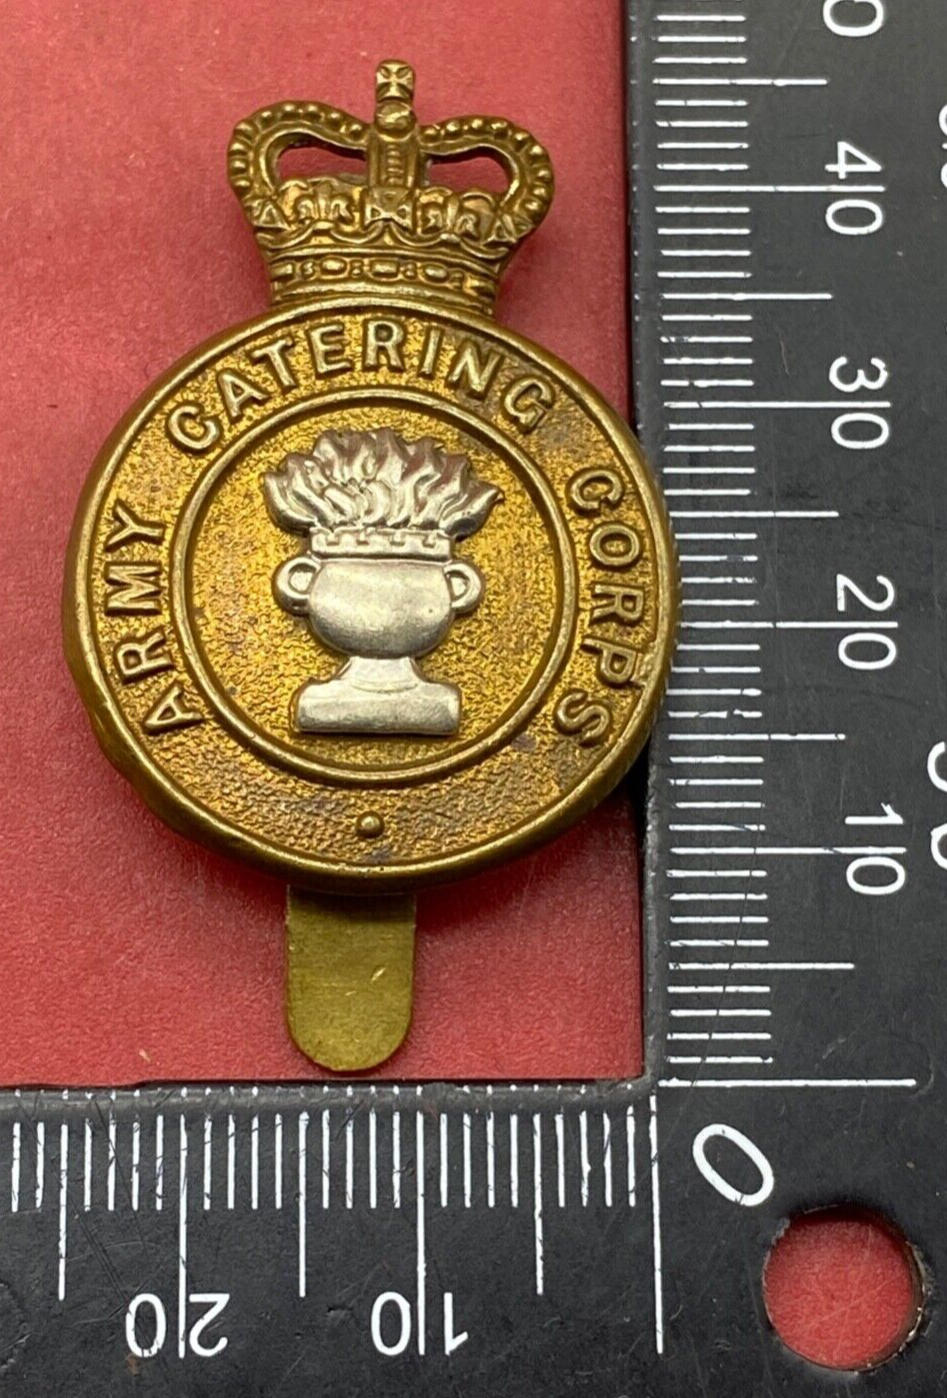 British Army - Army Catering Corps Queen's Crown Cap Badge. Maker Marked Slider.